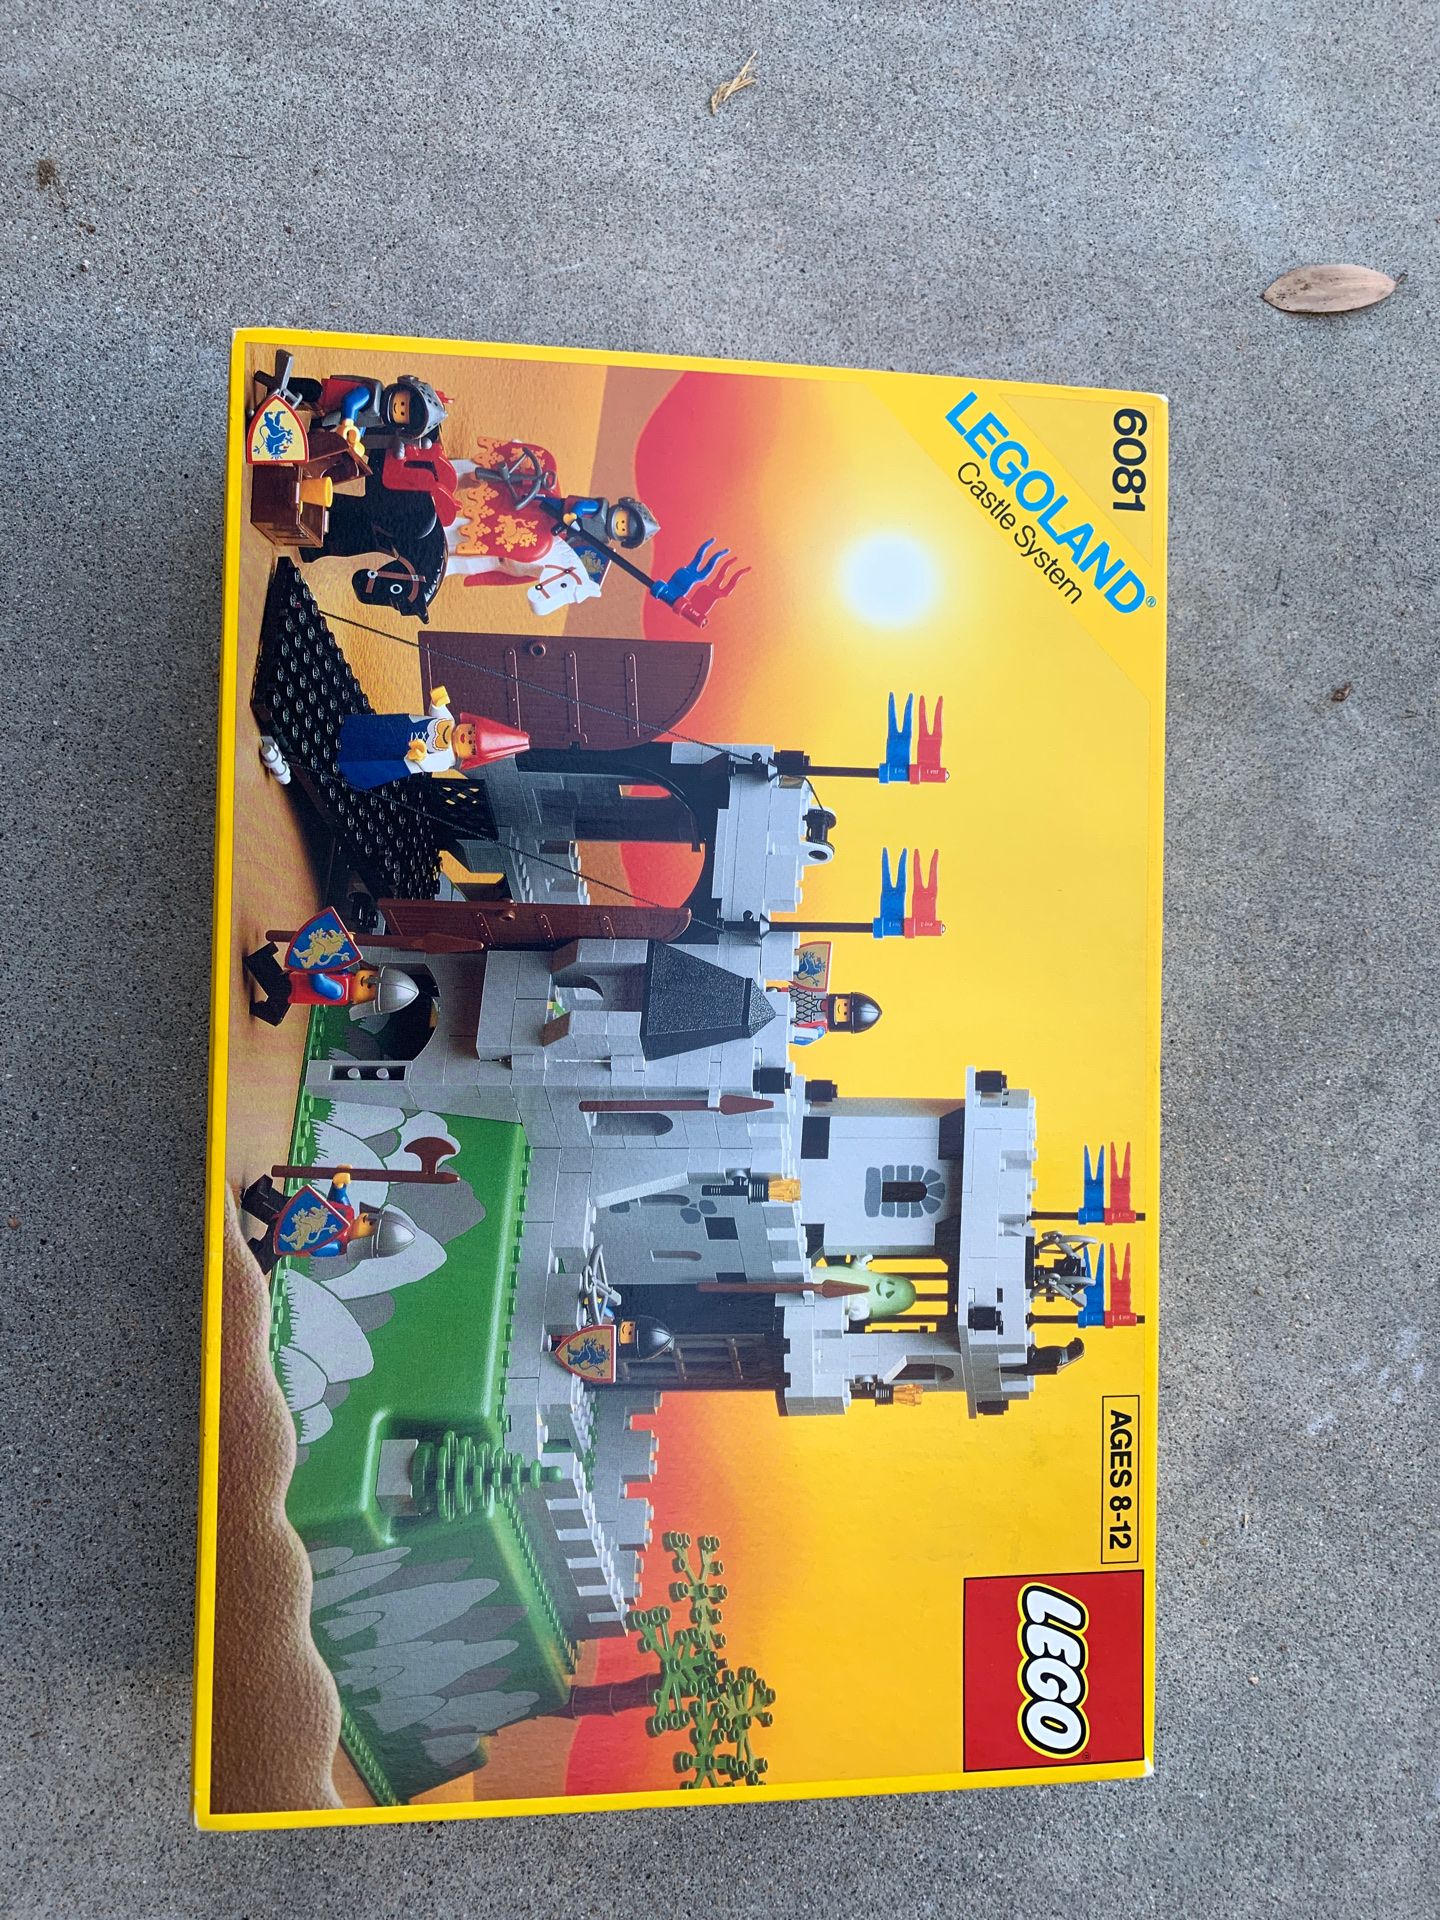 LEGOland castle system complete set with directions